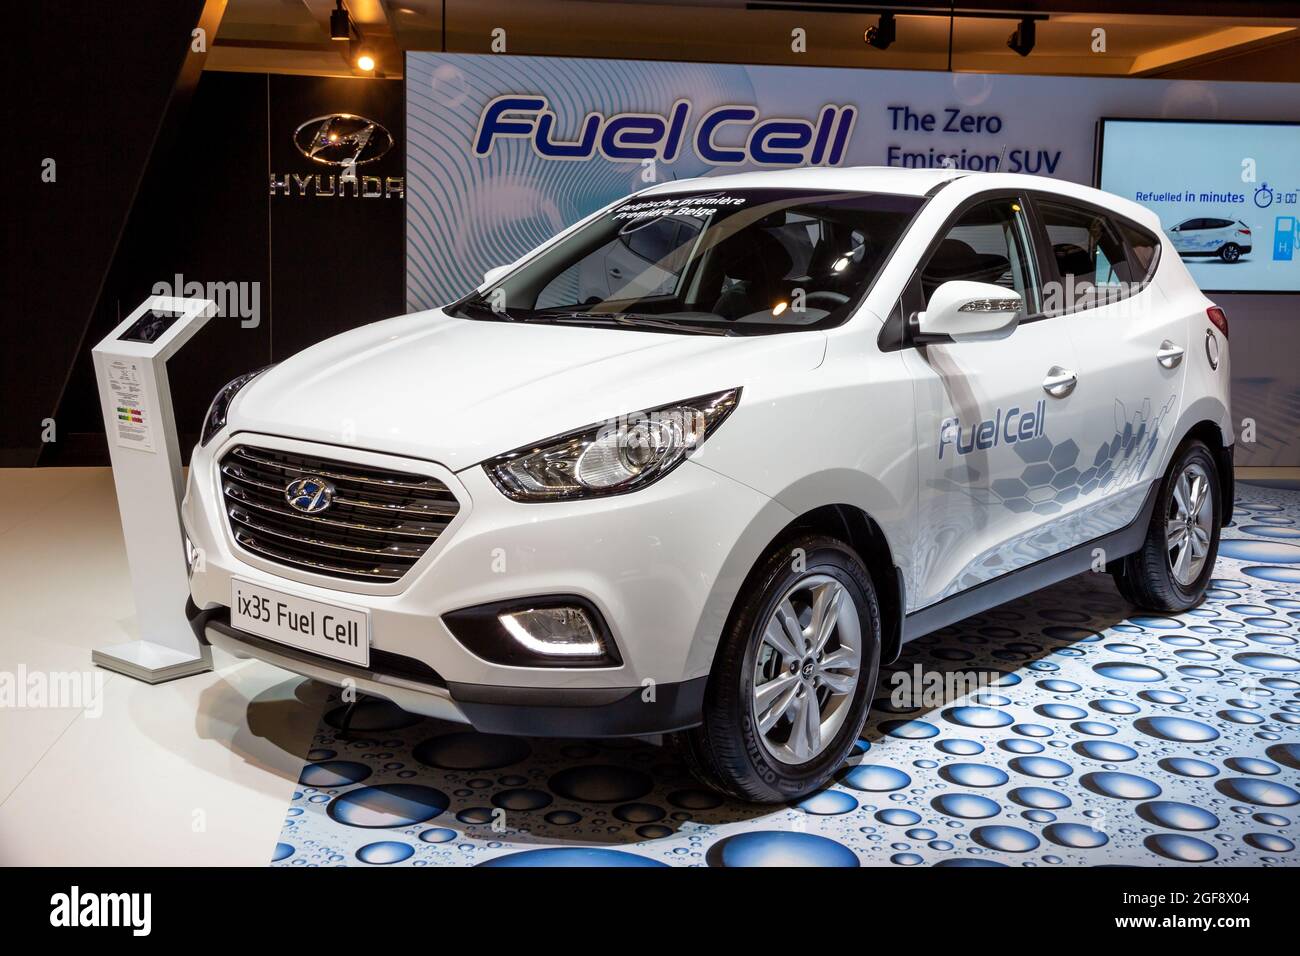 Hyundai ix35 FuelCell fuel cell electric vehicle showcased at the Brussels Expo Autosalon motor show. Belgium - January 12, 2016 Stock Photo